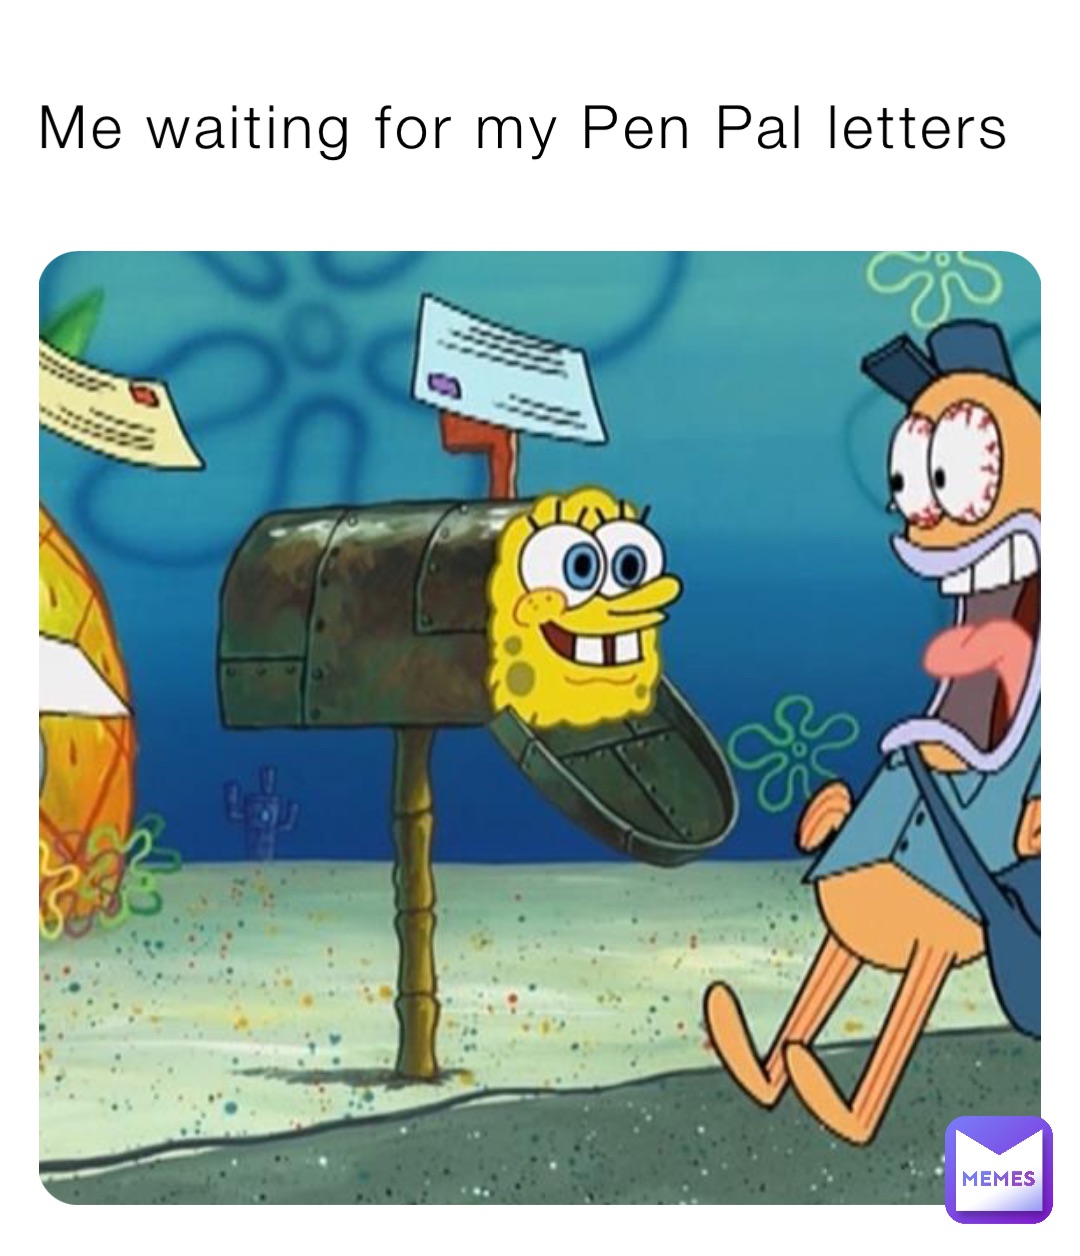 Me waiting for my Pen Pal letters